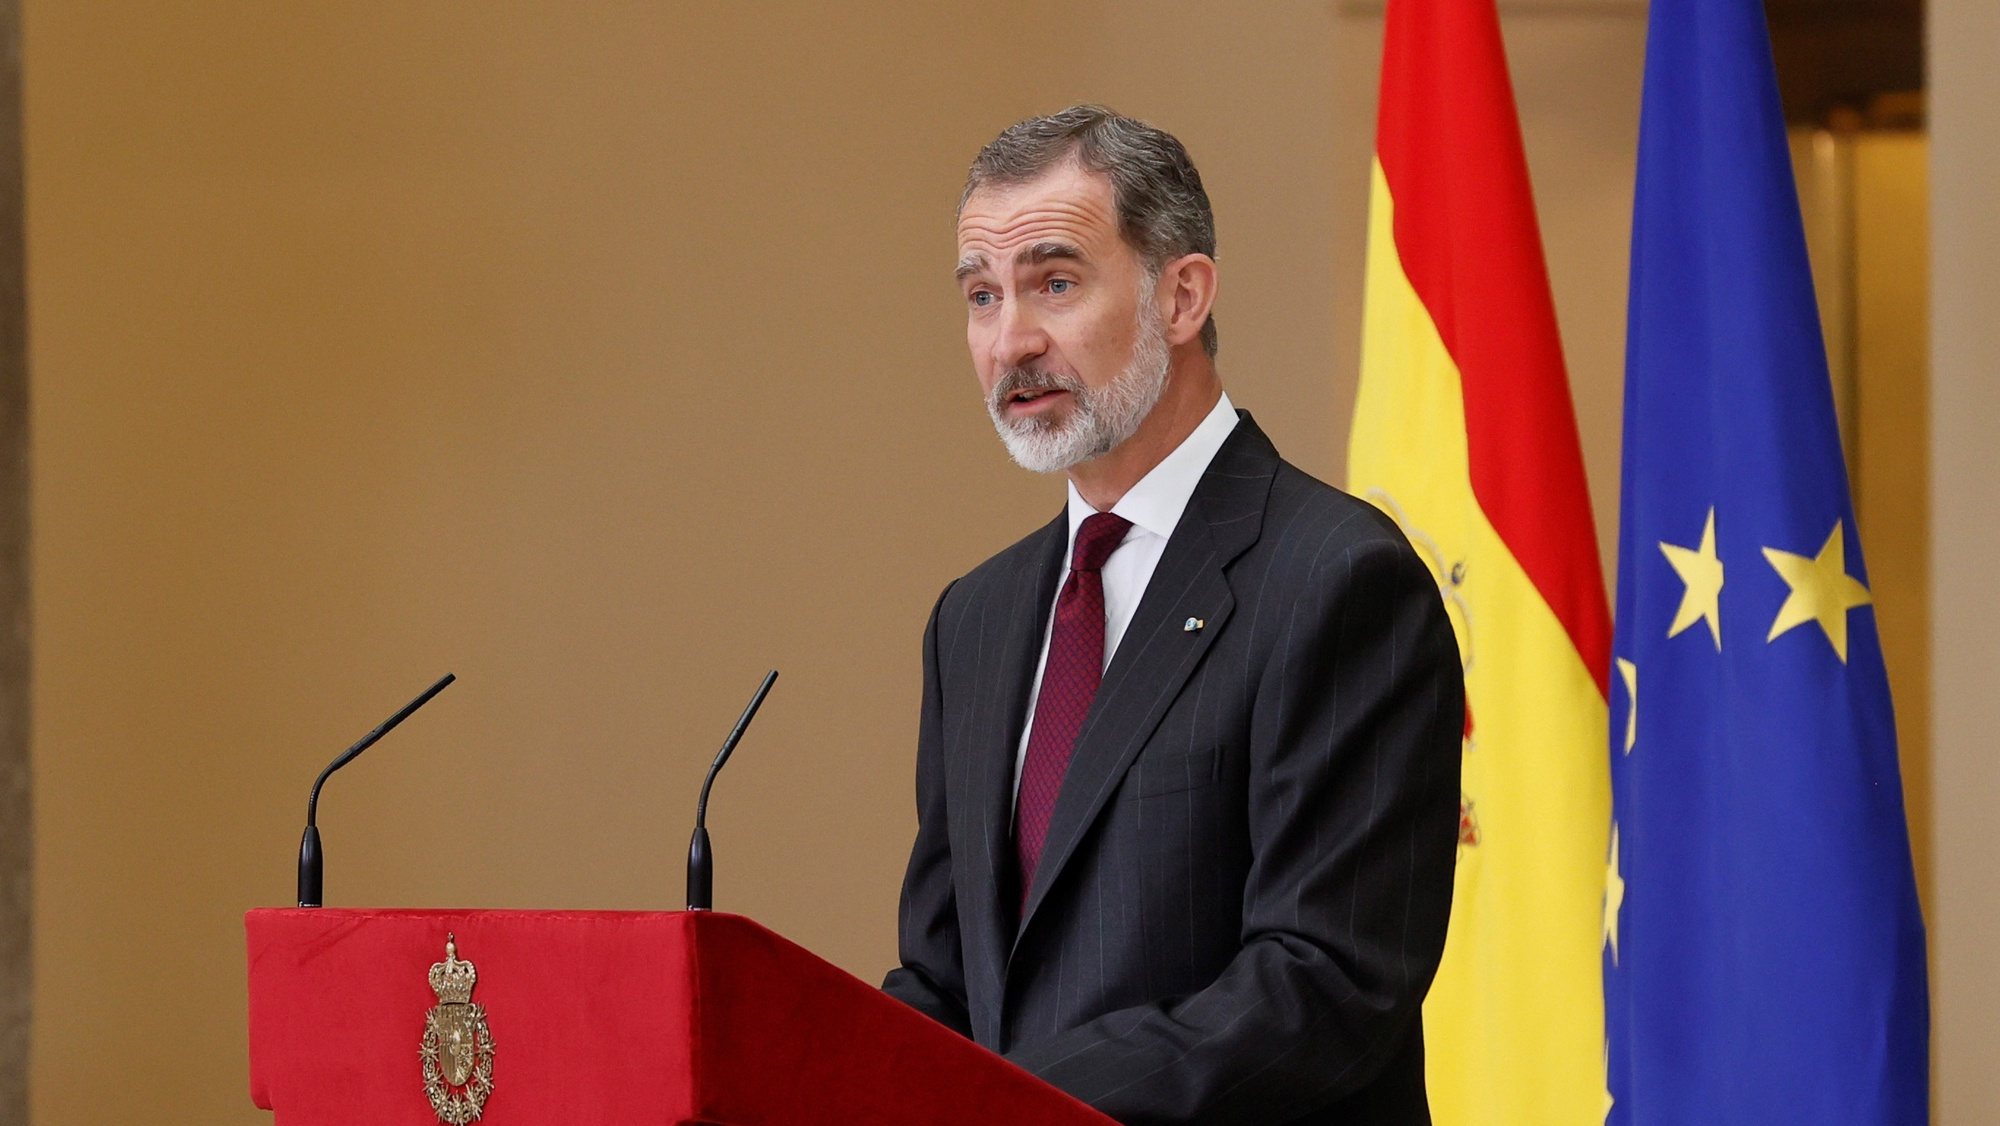 epa09295192 King Felipe VI delivers a speech during the awarding ceremony of the Gold Medals of Merit in the Fine Arts held at El Pardo Palace in Madrid, Spain, 23 June 2021. The Gold Medal for Merit in the Fine Arts is awarded by the Spanish ministry of culture to individuals or organizations excelling in artistic and cultural works as well as to those who intervene in the promotion of art and culture and the conservation of the artistic heritage.  EPA/Ballesteros / POOL